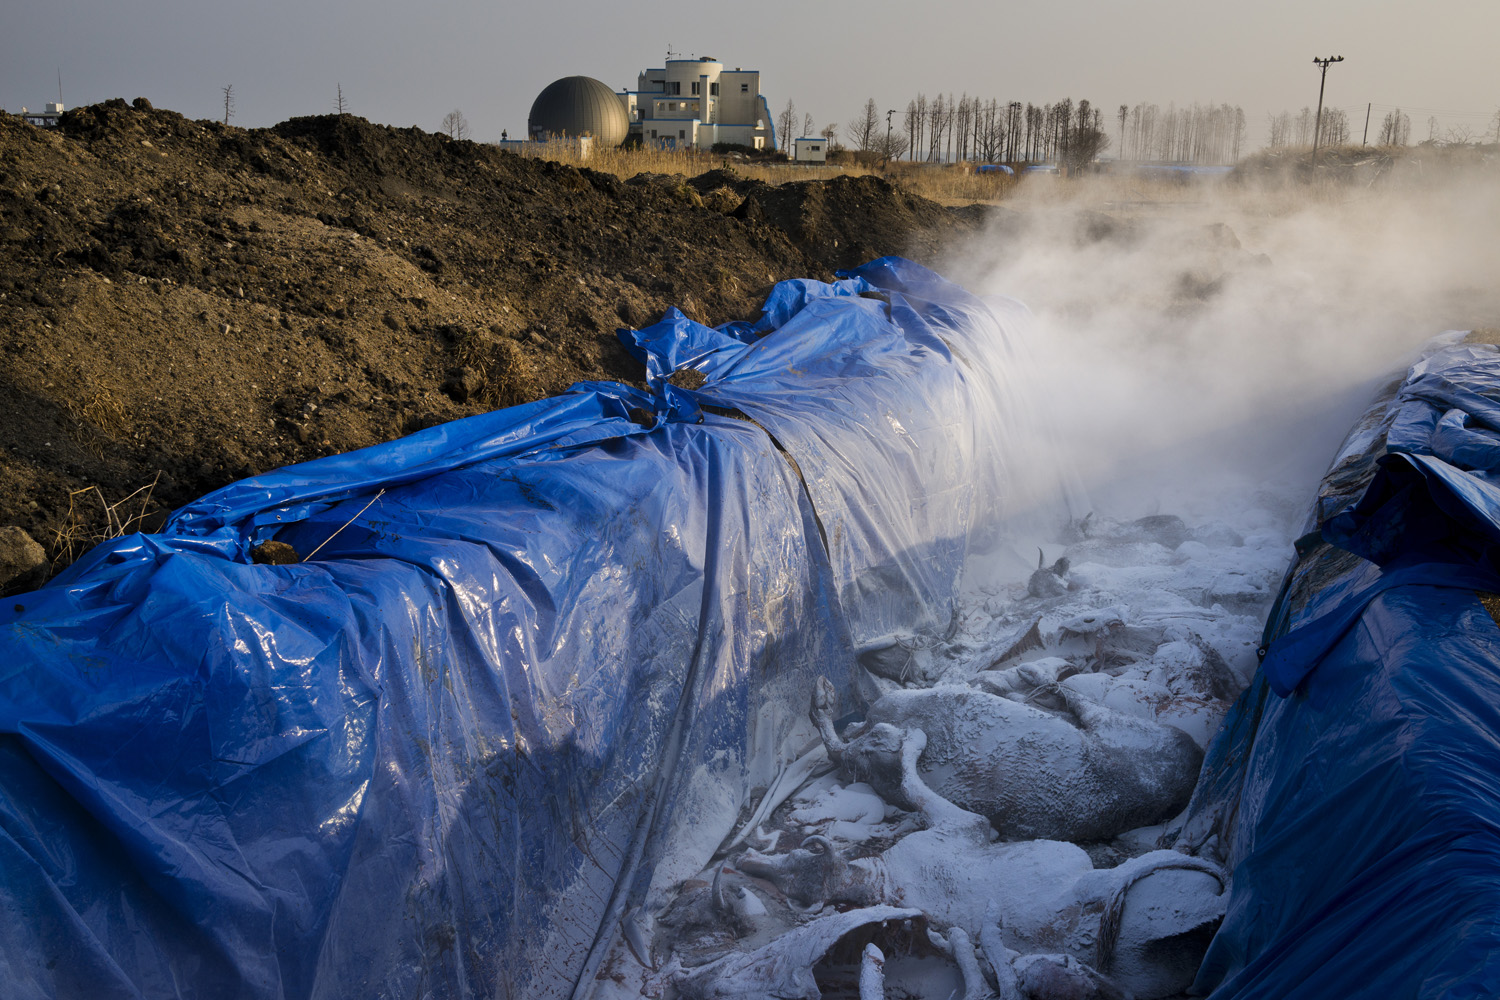 Japan, Namie, 2014. A dozen cow remains are piled in a large pit among thousands of other cow carcasses buried inside the exclusion zone a few kilometers from the Fukushima Daiichi Nuclear Power Station.